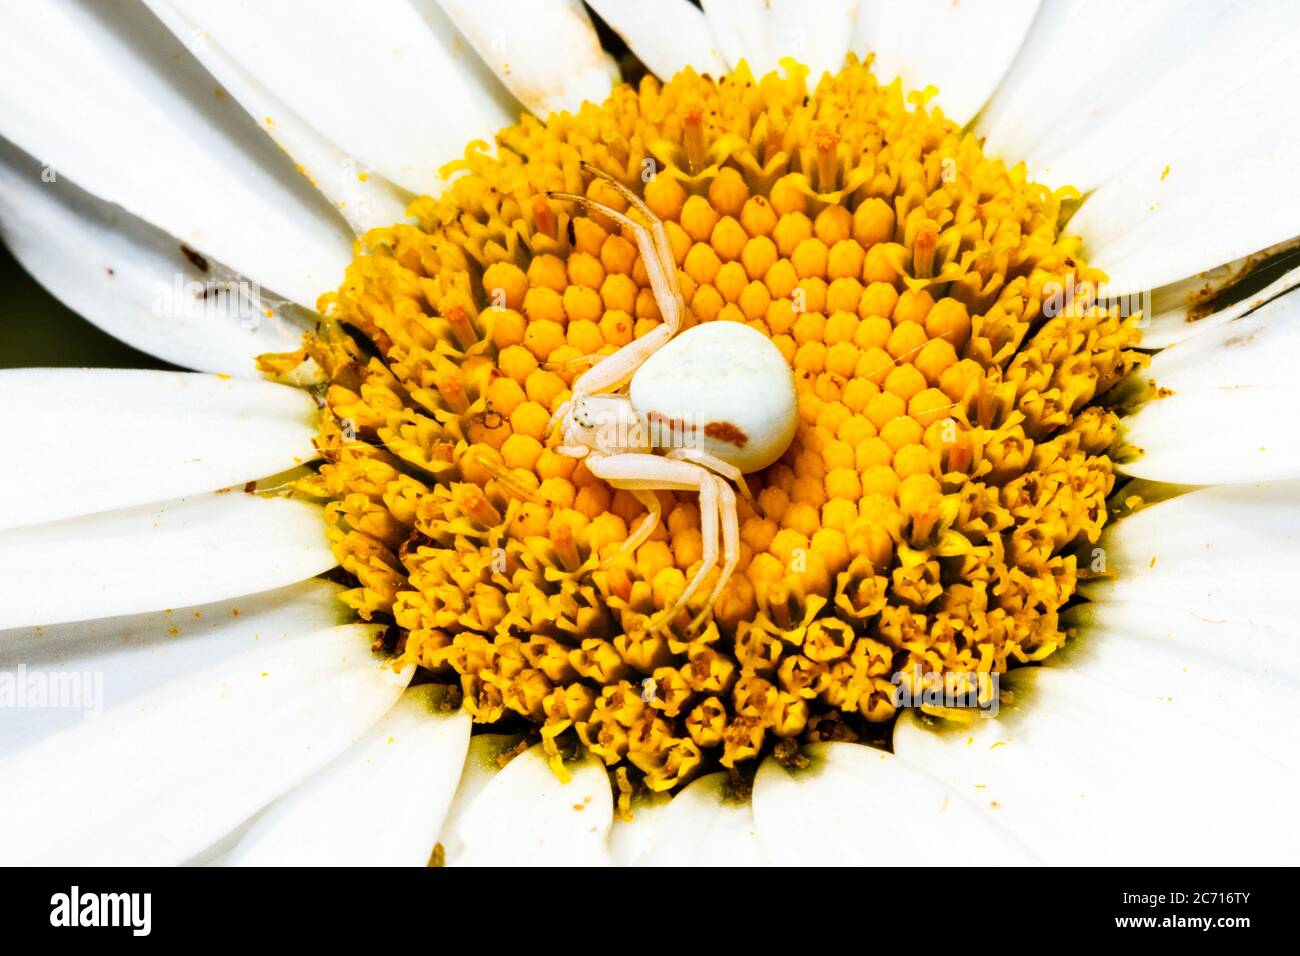 UK weather.A crab spider nestles itself into a Daisy flower this morning on a sunny day in East Sussex, UK.   Credit: Ed Brown/Alamy Live News Stock Photo